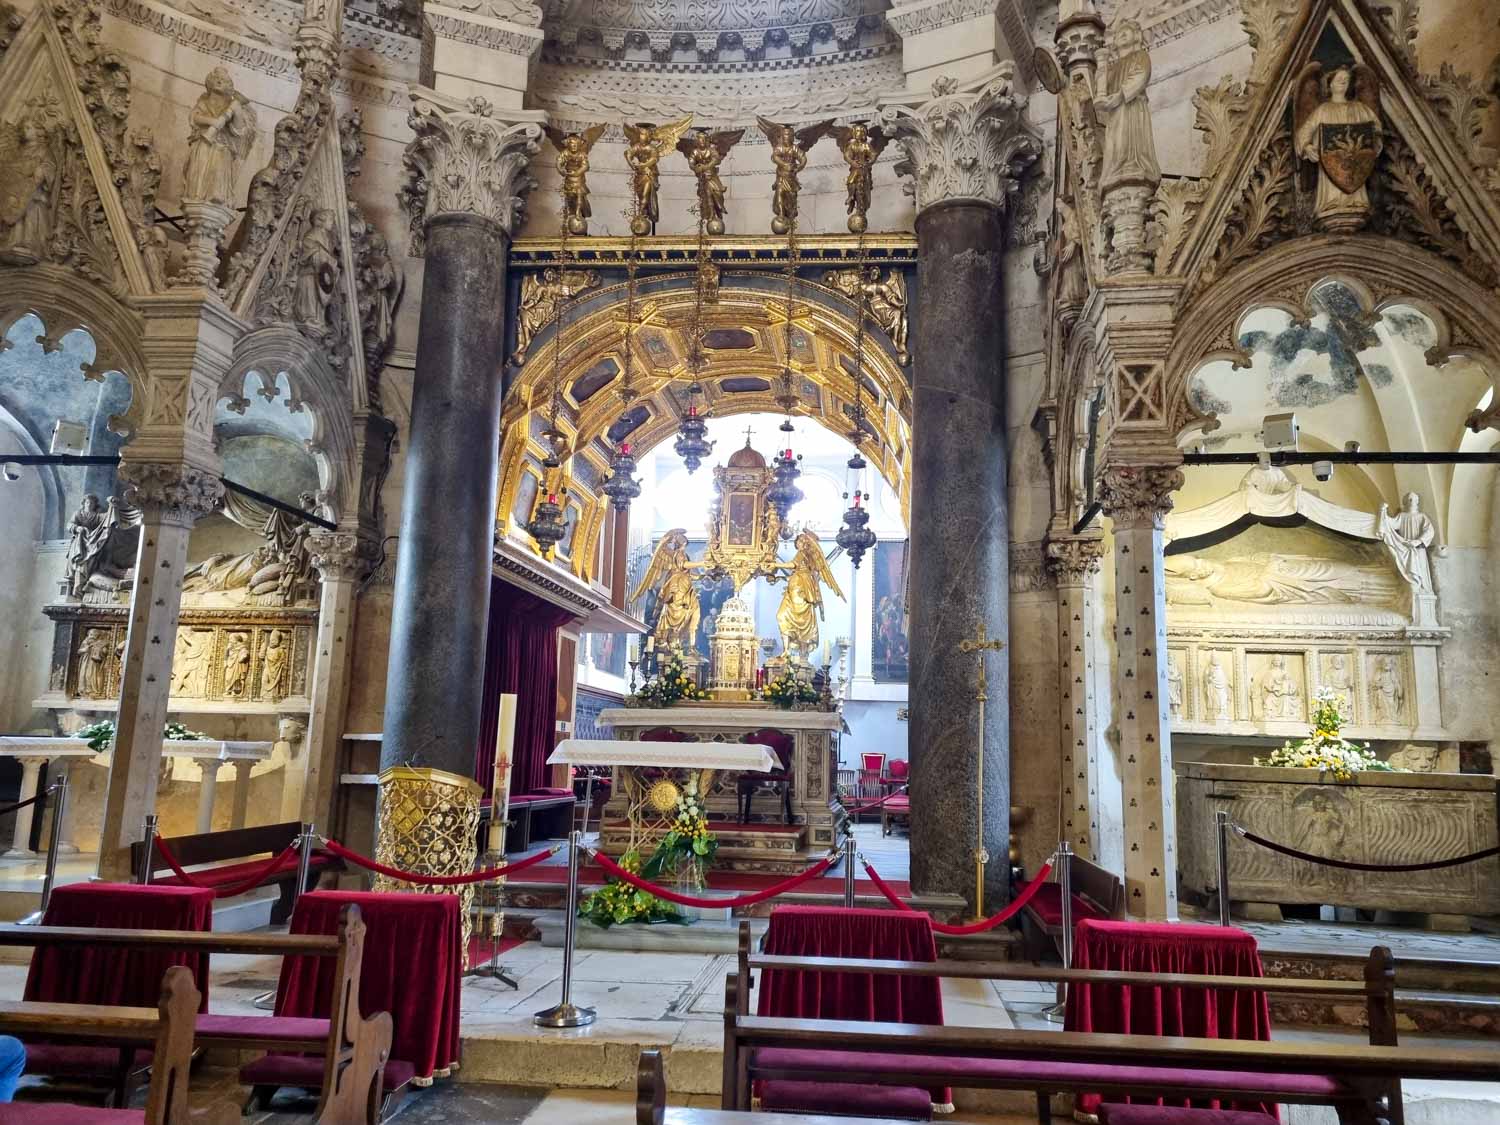 View of the gilded interior of the cathedral of St Domnius, formerly Diocletian's Mausoleum - a visit is one of the best things to do with kids in Split